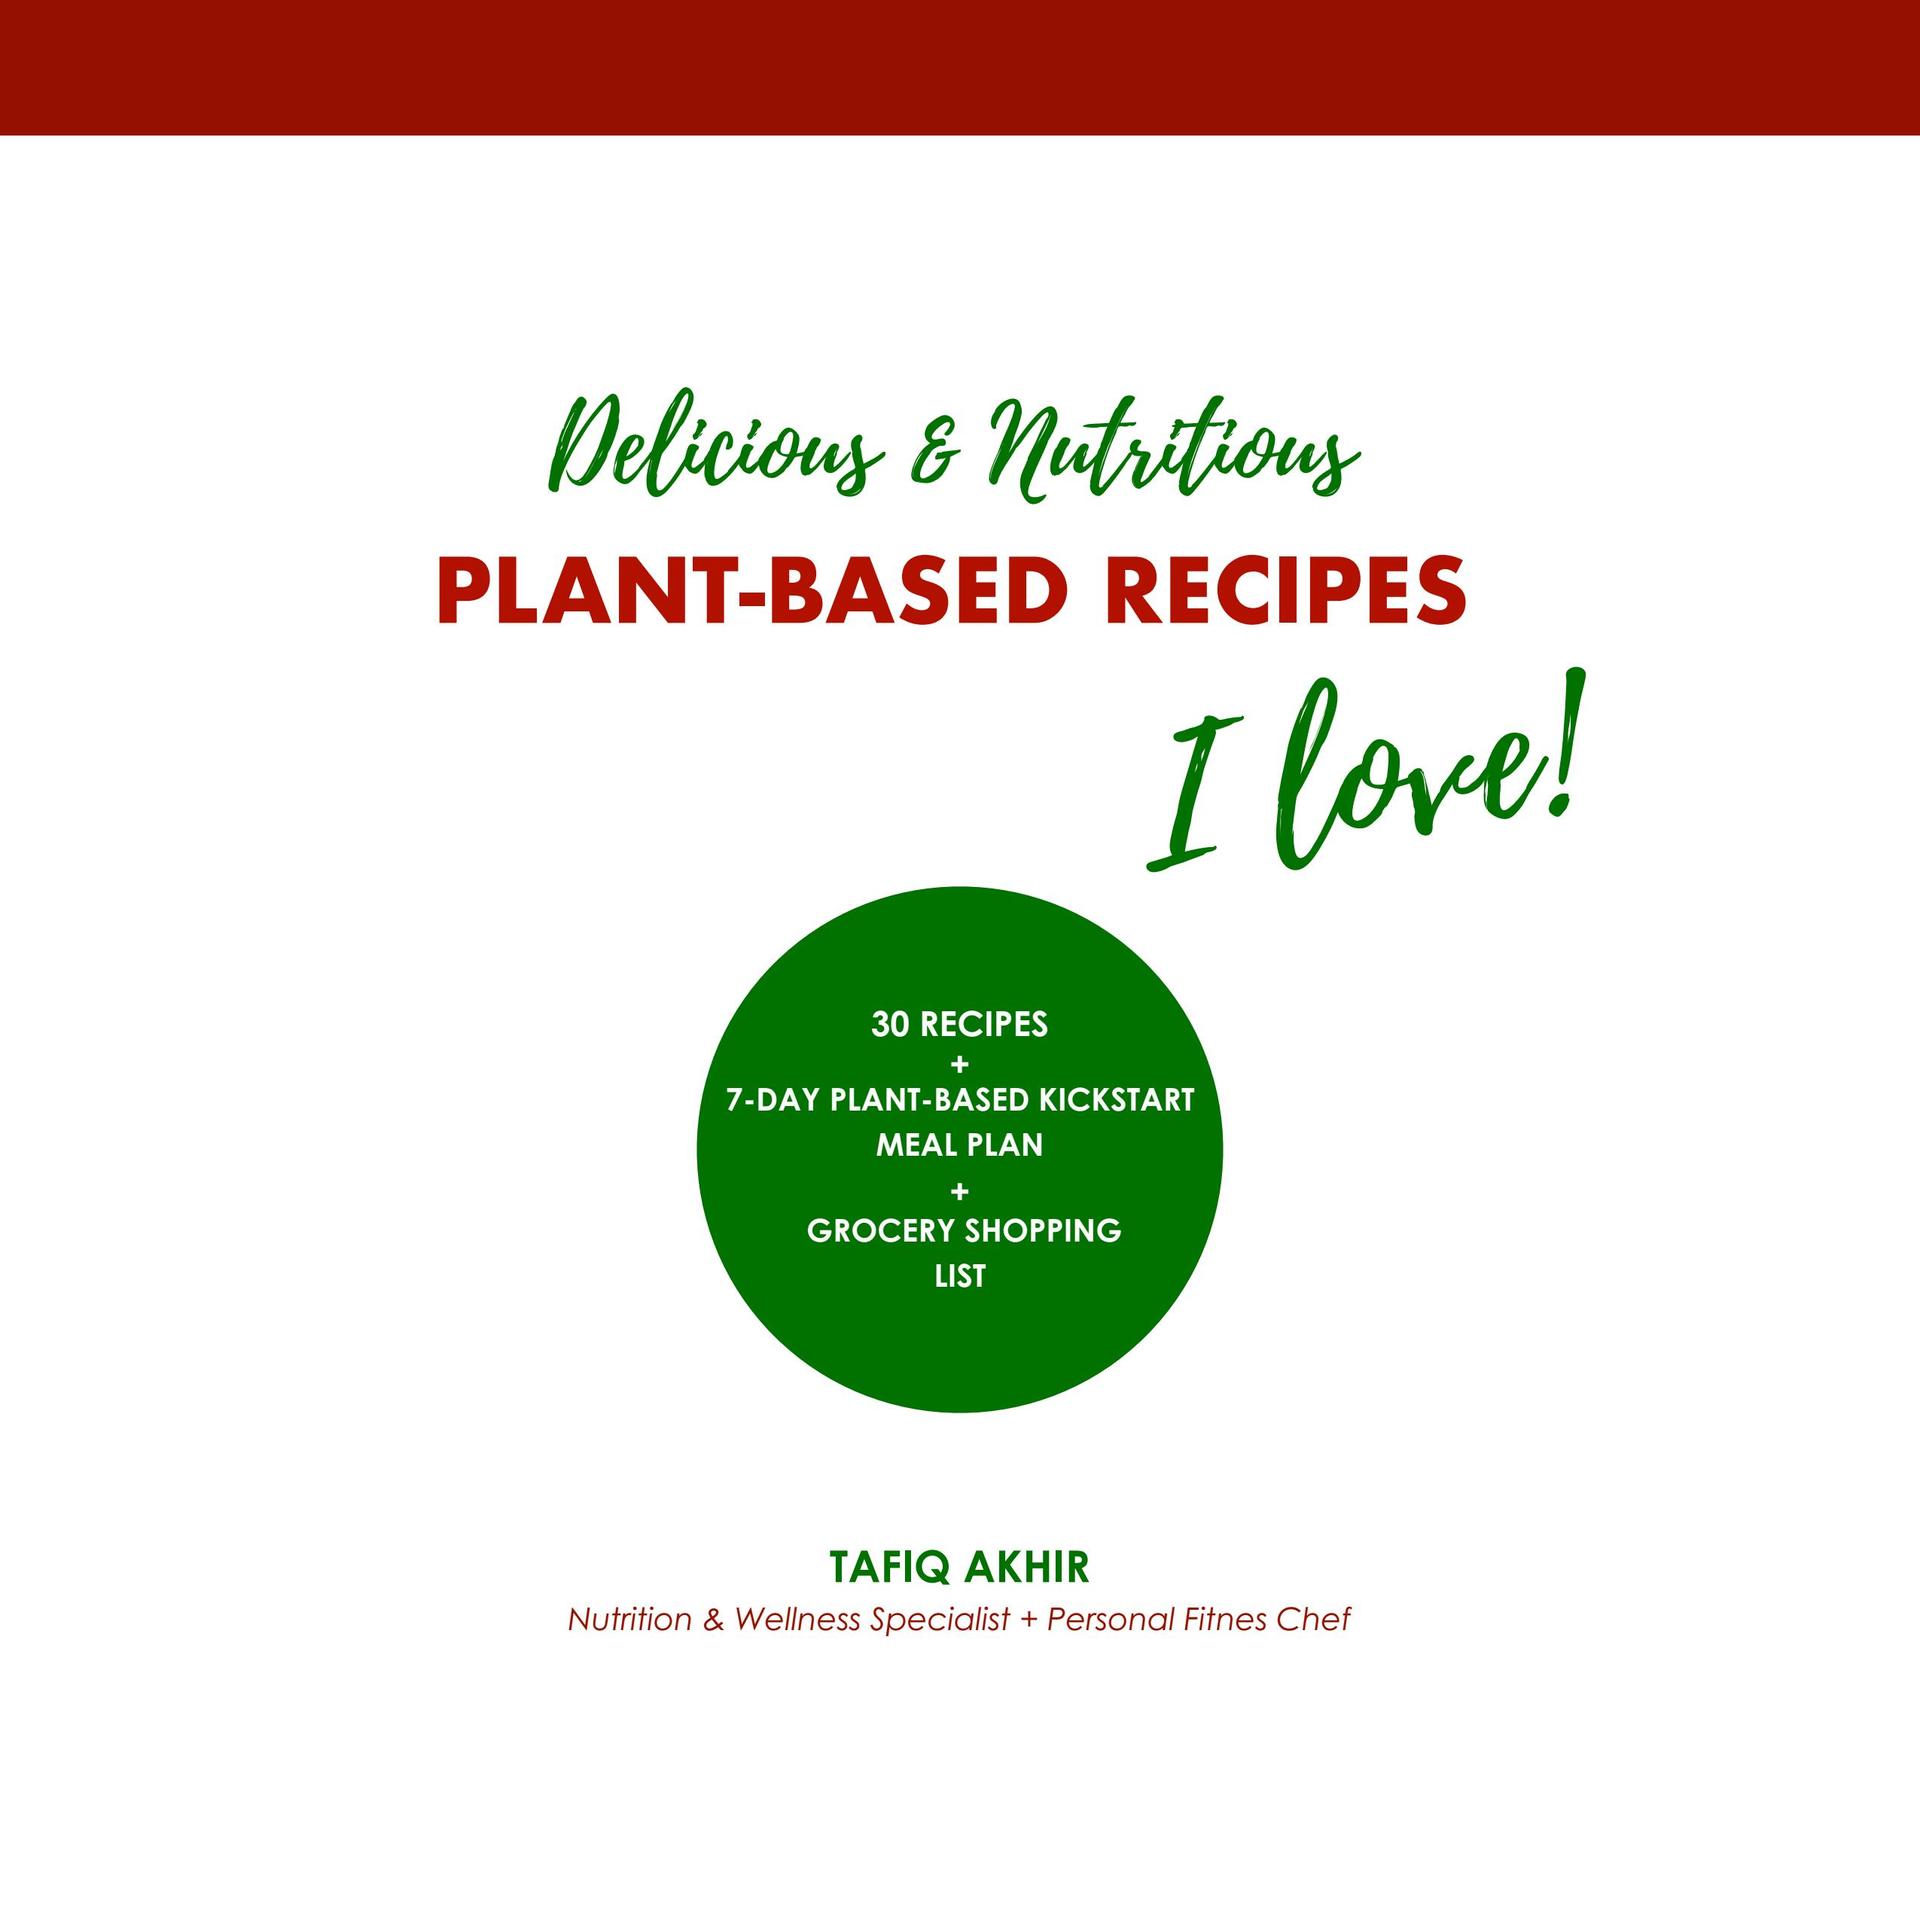 Delicious Nutritious Recipes I Love 30 Recipes 7-Day Plant-Based Kickstart Meal Plan Grocery Shopping List - photo 2